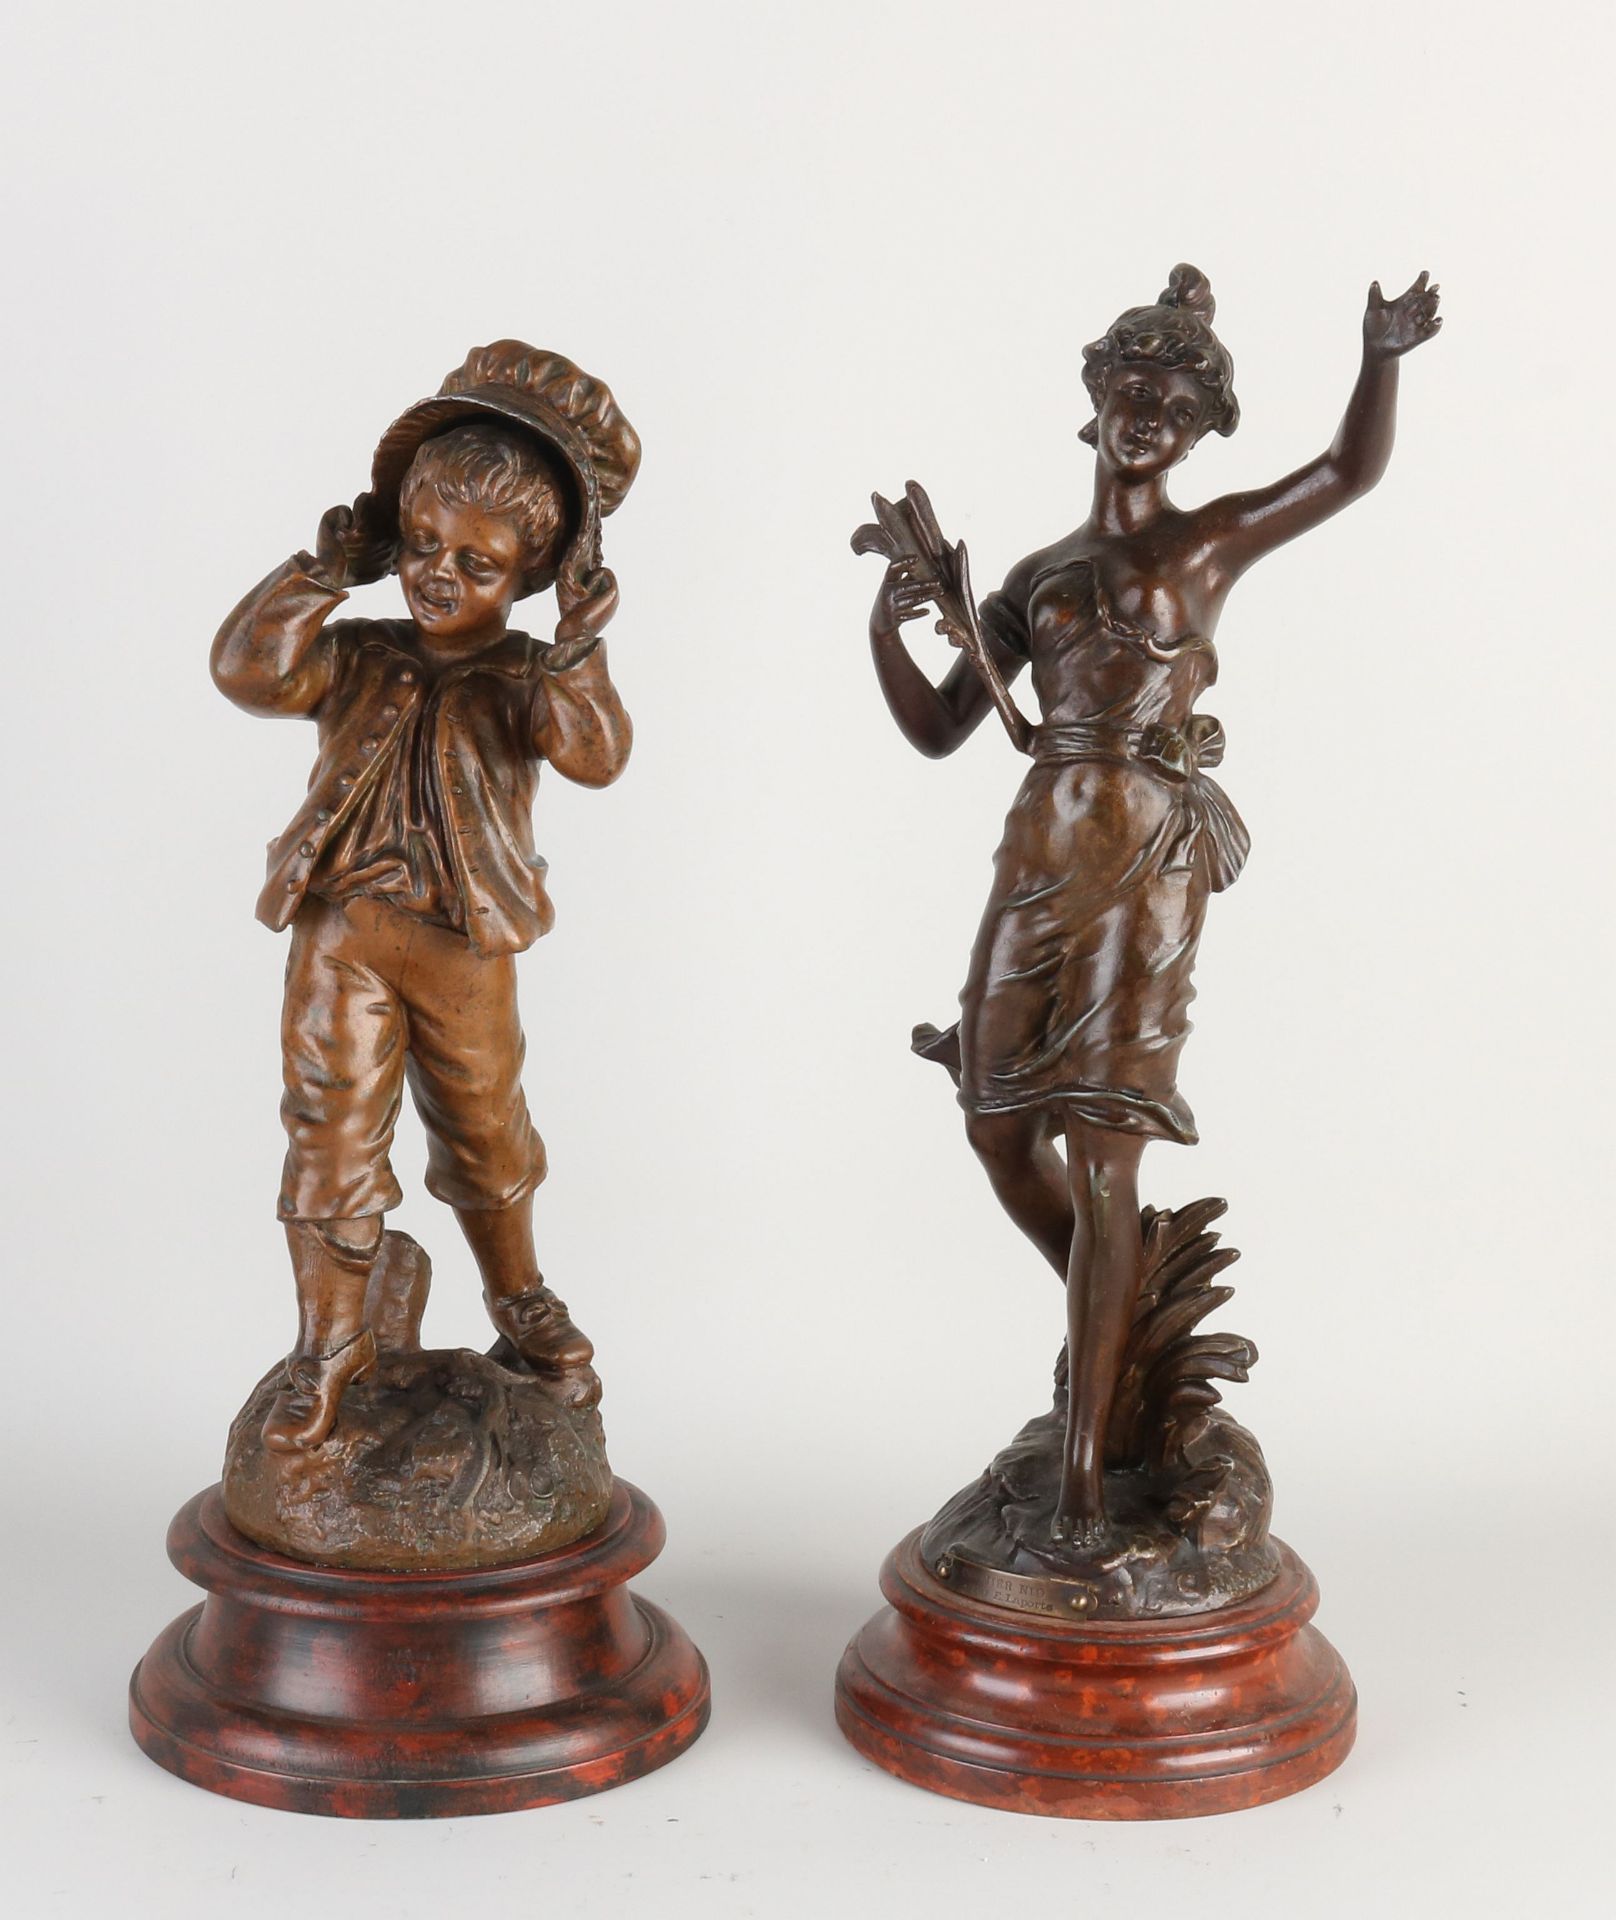 Two antique French figures